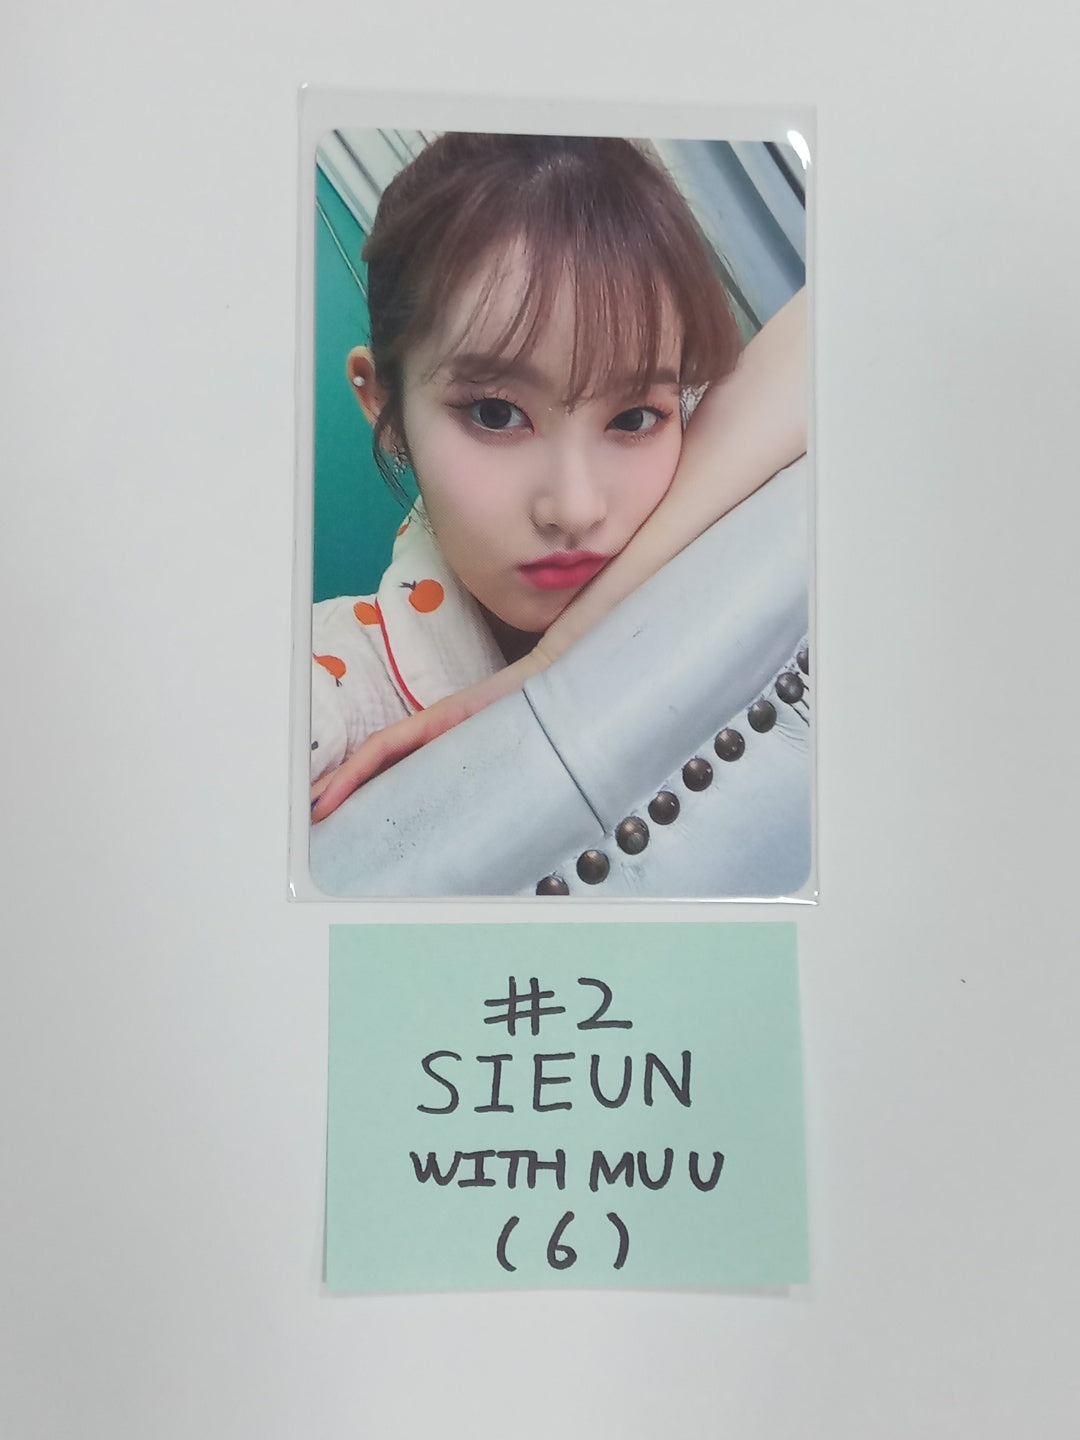 StayC 'WE NEED LOVE' - Withmuu Fansign Event Photocard